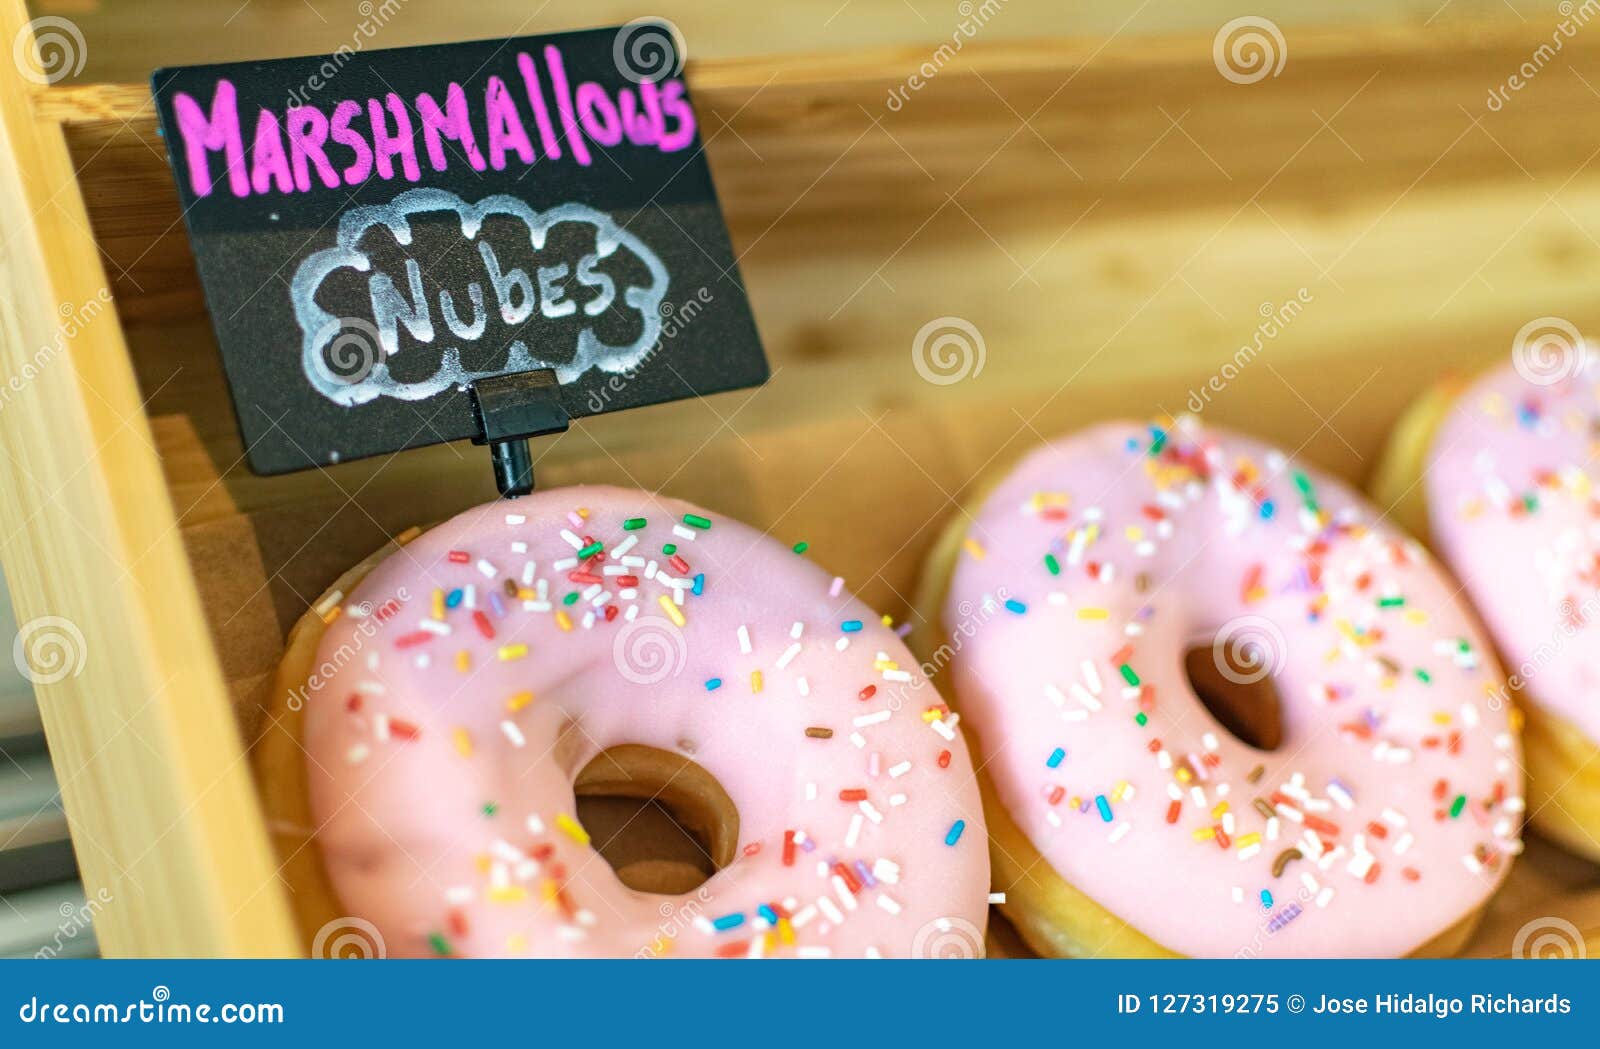 342 Building Donuts Photos - & Royalty-Free Stock Photos from Dreamstime - Page 4